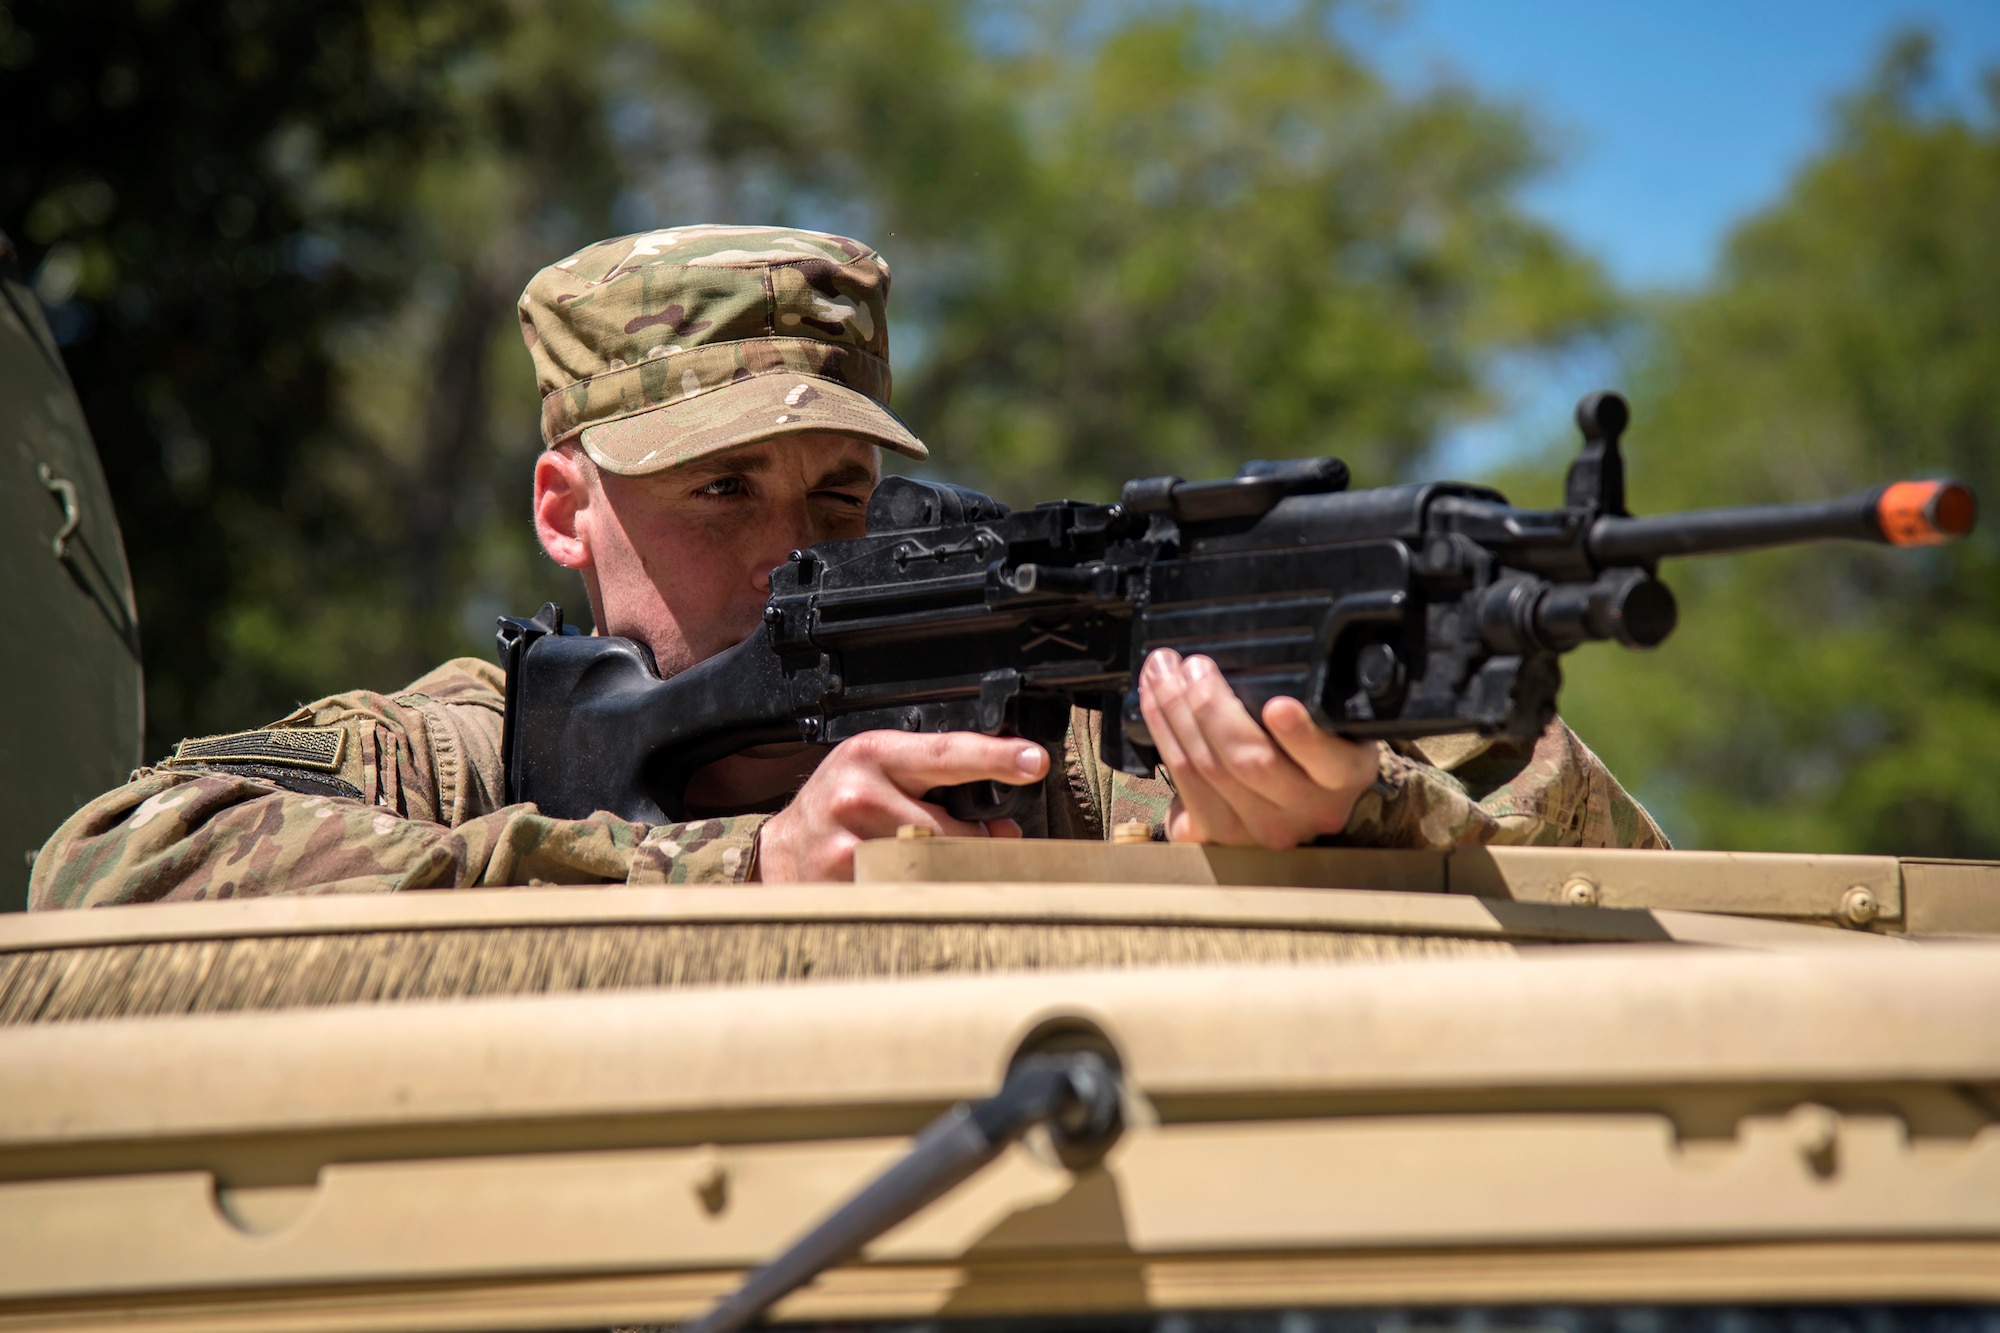 Airman 1st Class Alexander Moore, 824th Base Defense Squadron fireteam member, aims down the sight of a simulated weapon from the turret position of a Humvee during vehicle operations training, March 28, 2018, at Moody Air Force Base, Ga. The vehicle ops training is part of Initial Qualification Training, which gives new Airmen coming into the 820th Base Defense Group an opportunity to learn a baseline of basic combat skills that will be needed to successfully operate within a cohesive unit while in a deployed environment. (U.S. Air Force photo by Airman Eugene Oliver)